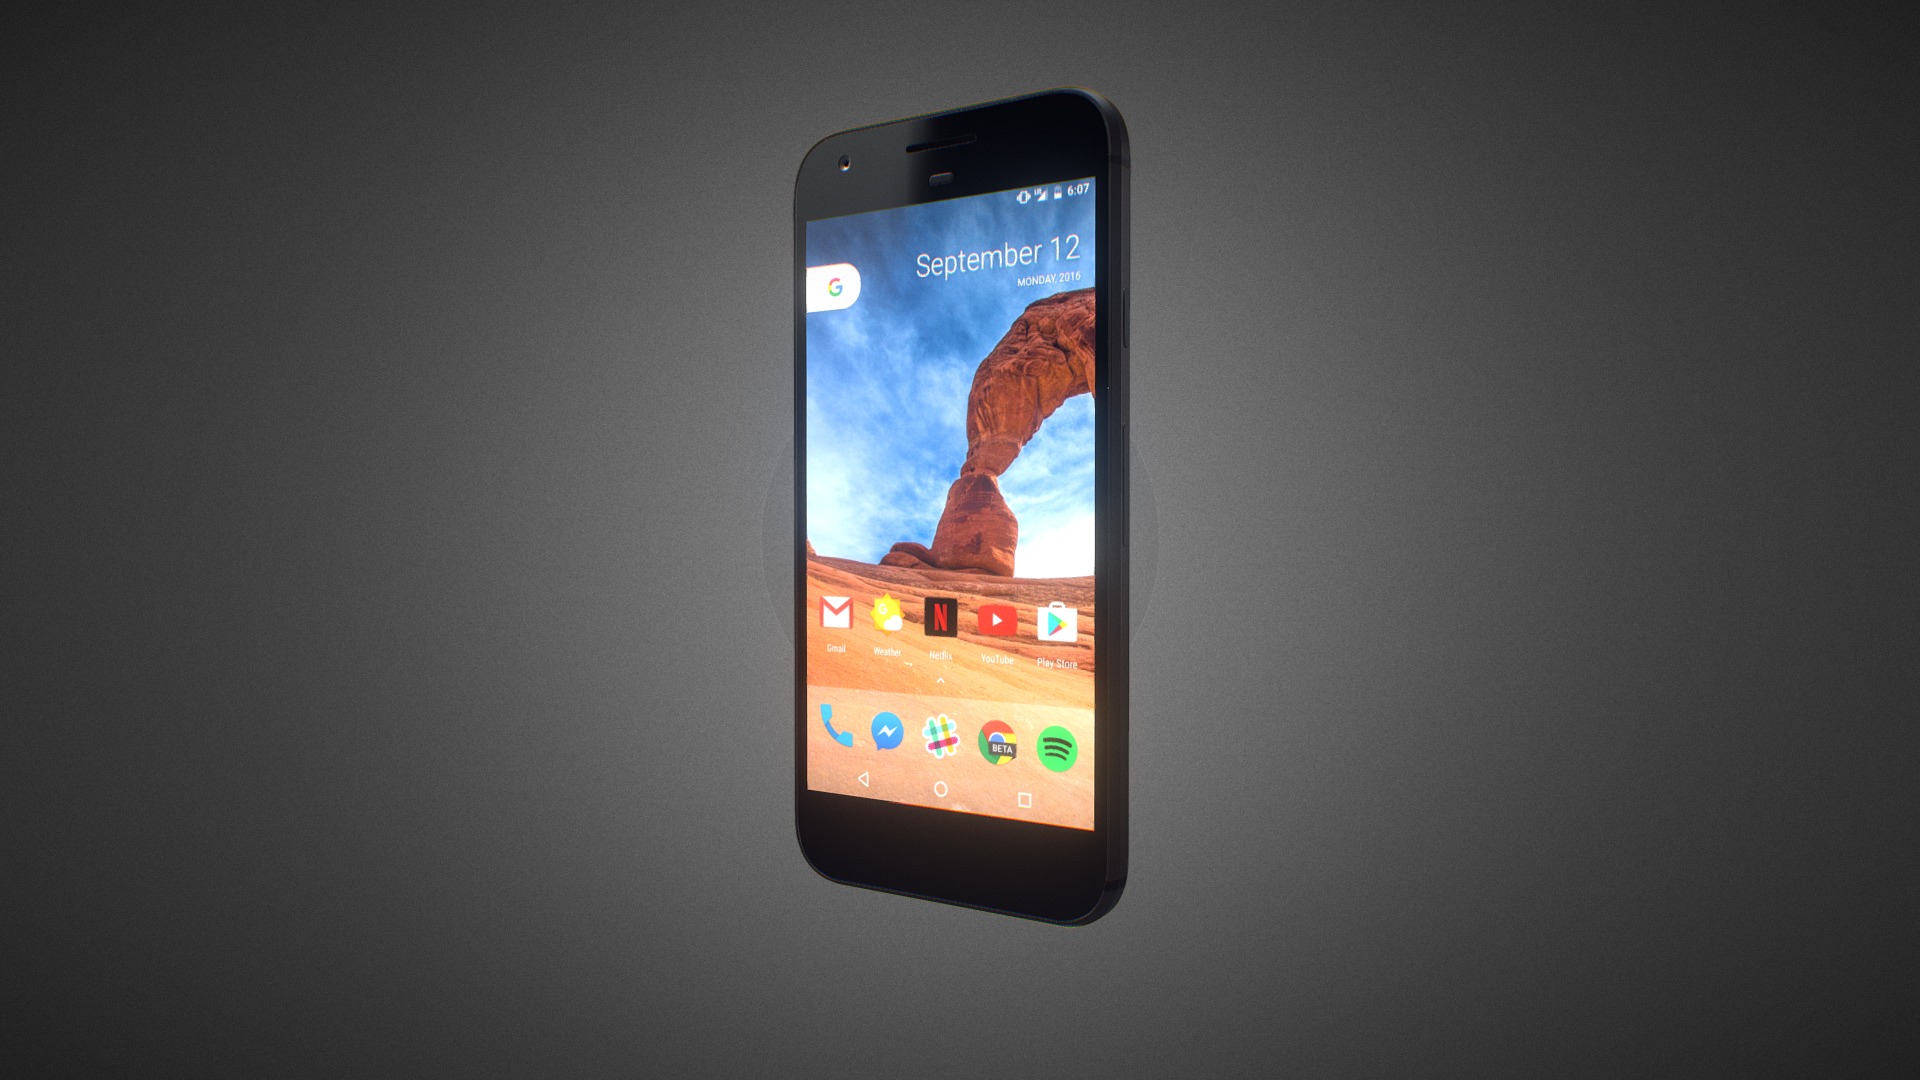 3D model Google Pixel for Element 3D - This is a 3D model of the Google Pixel for Element 3D. The 3D model is about a cell phone with a cracked screen.